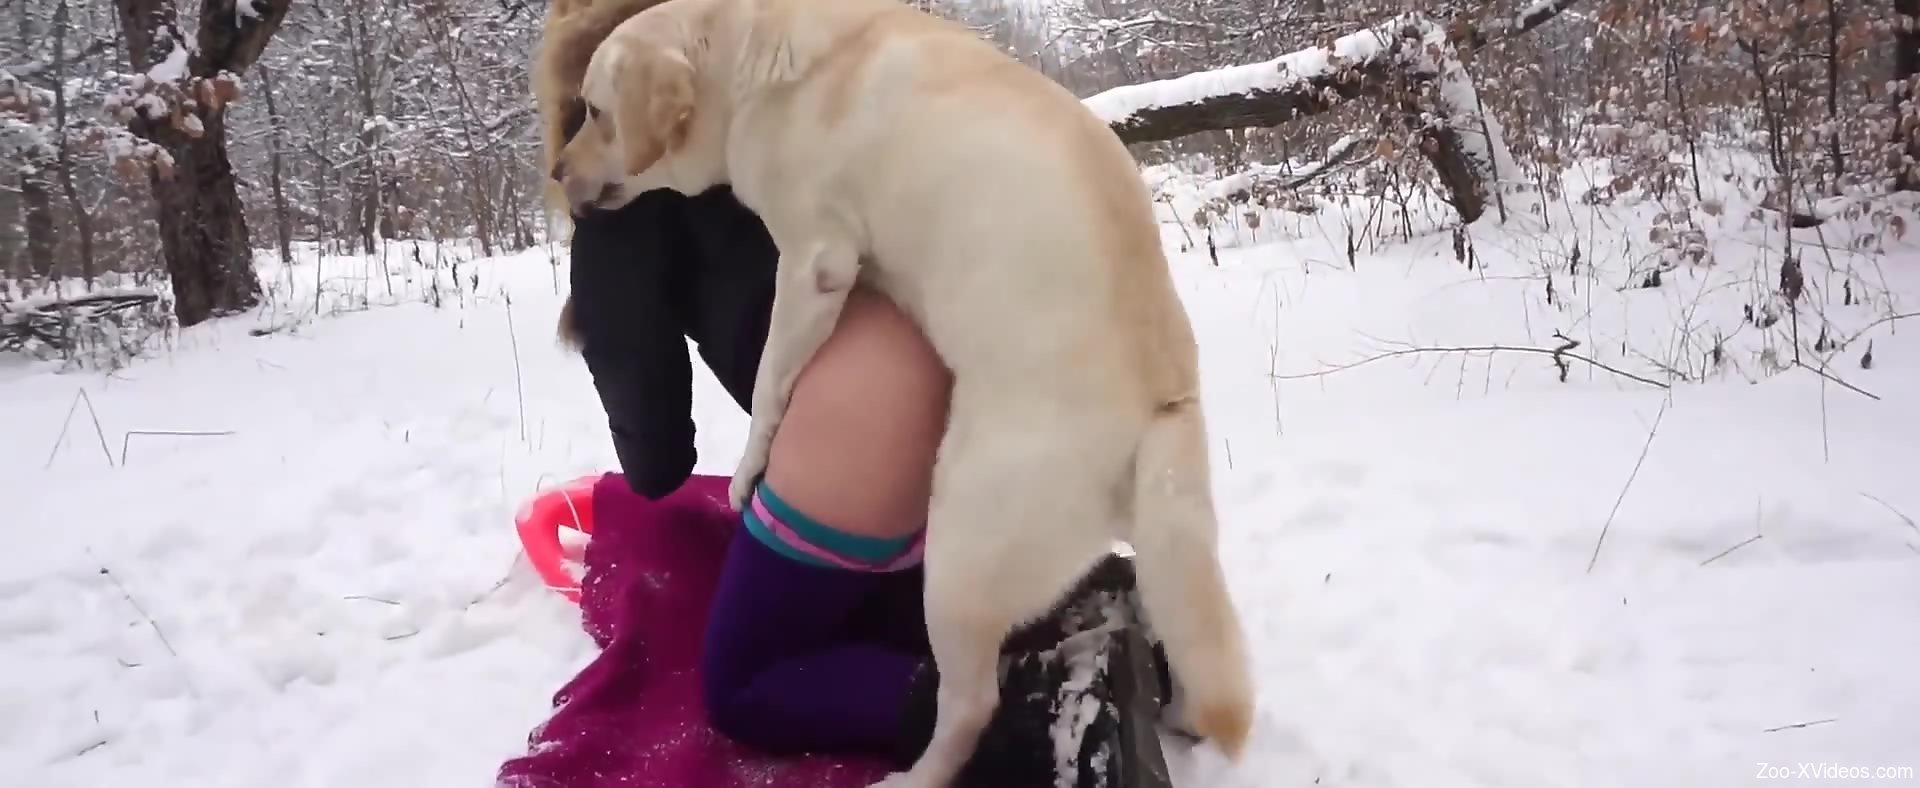 Xvidos Dog - Horny blonde lady fucks a sexy dog in the snow